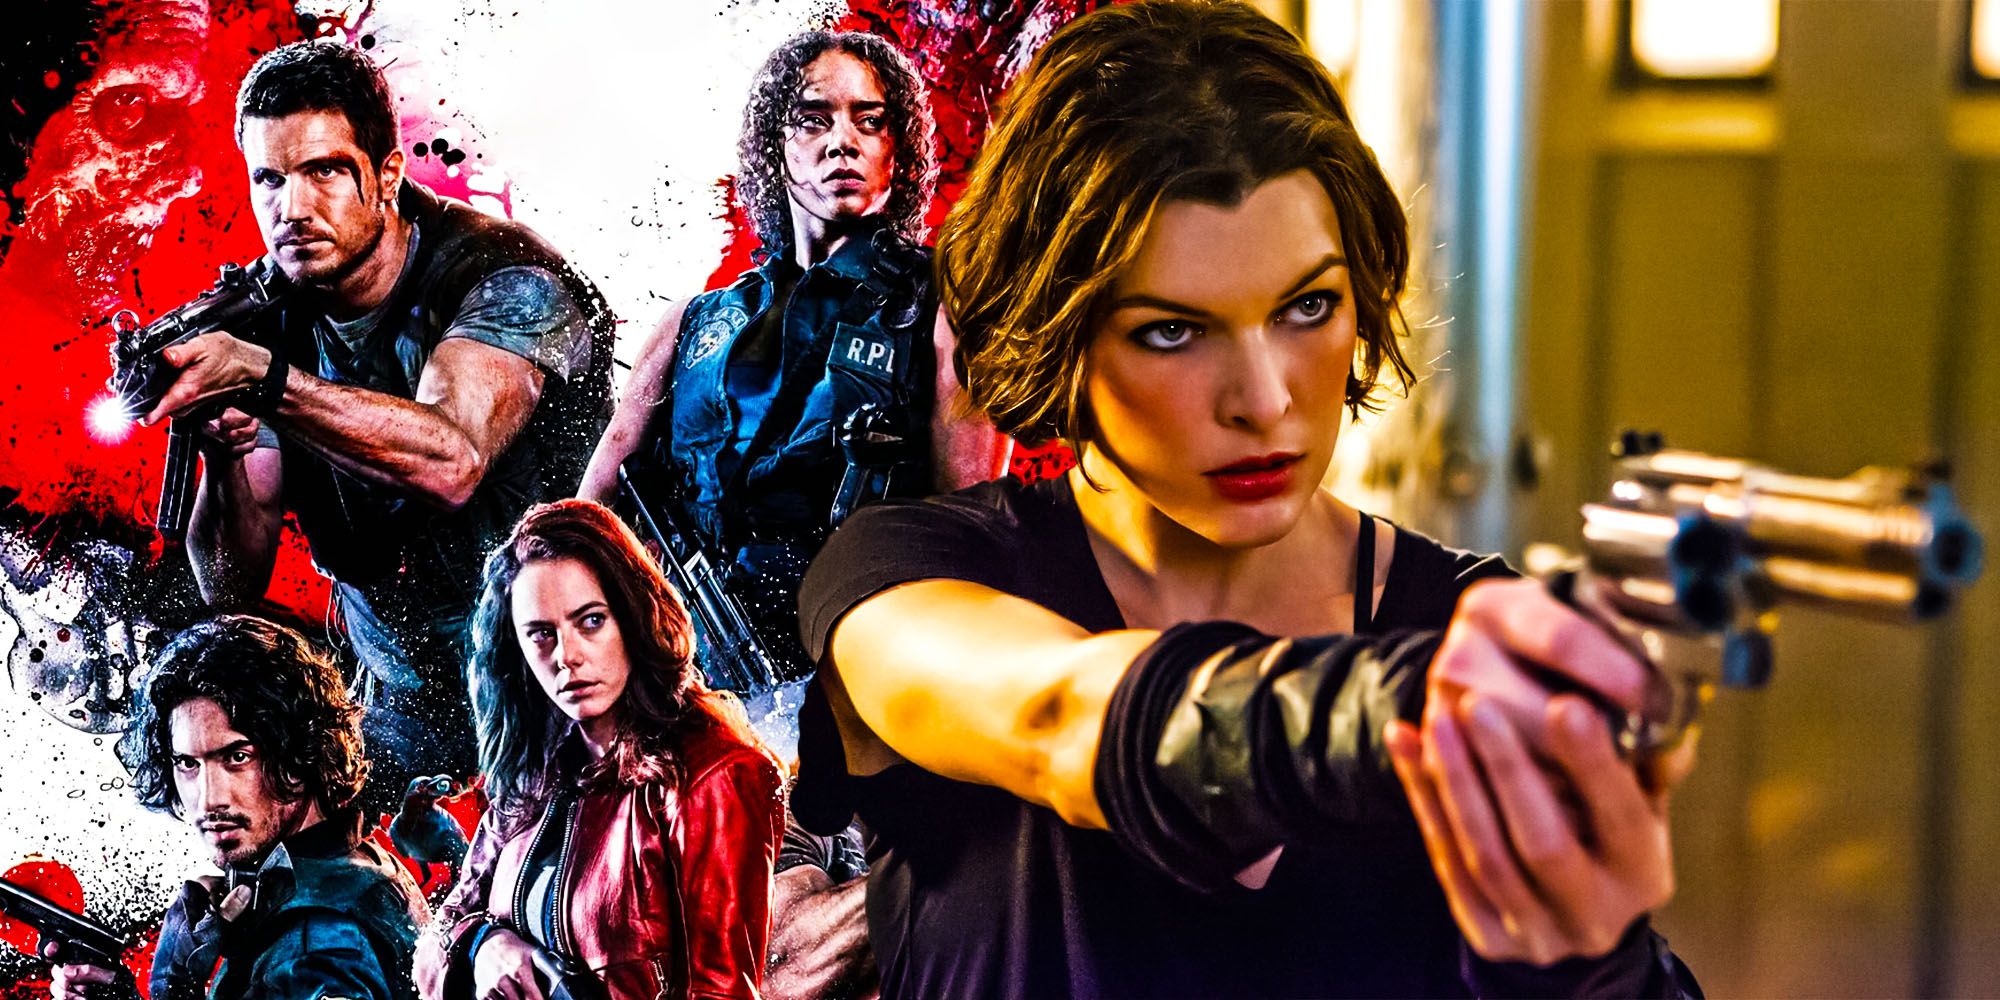 Milla Jovovich Resident Evil movies doomed the reboot welcome to raccoon city